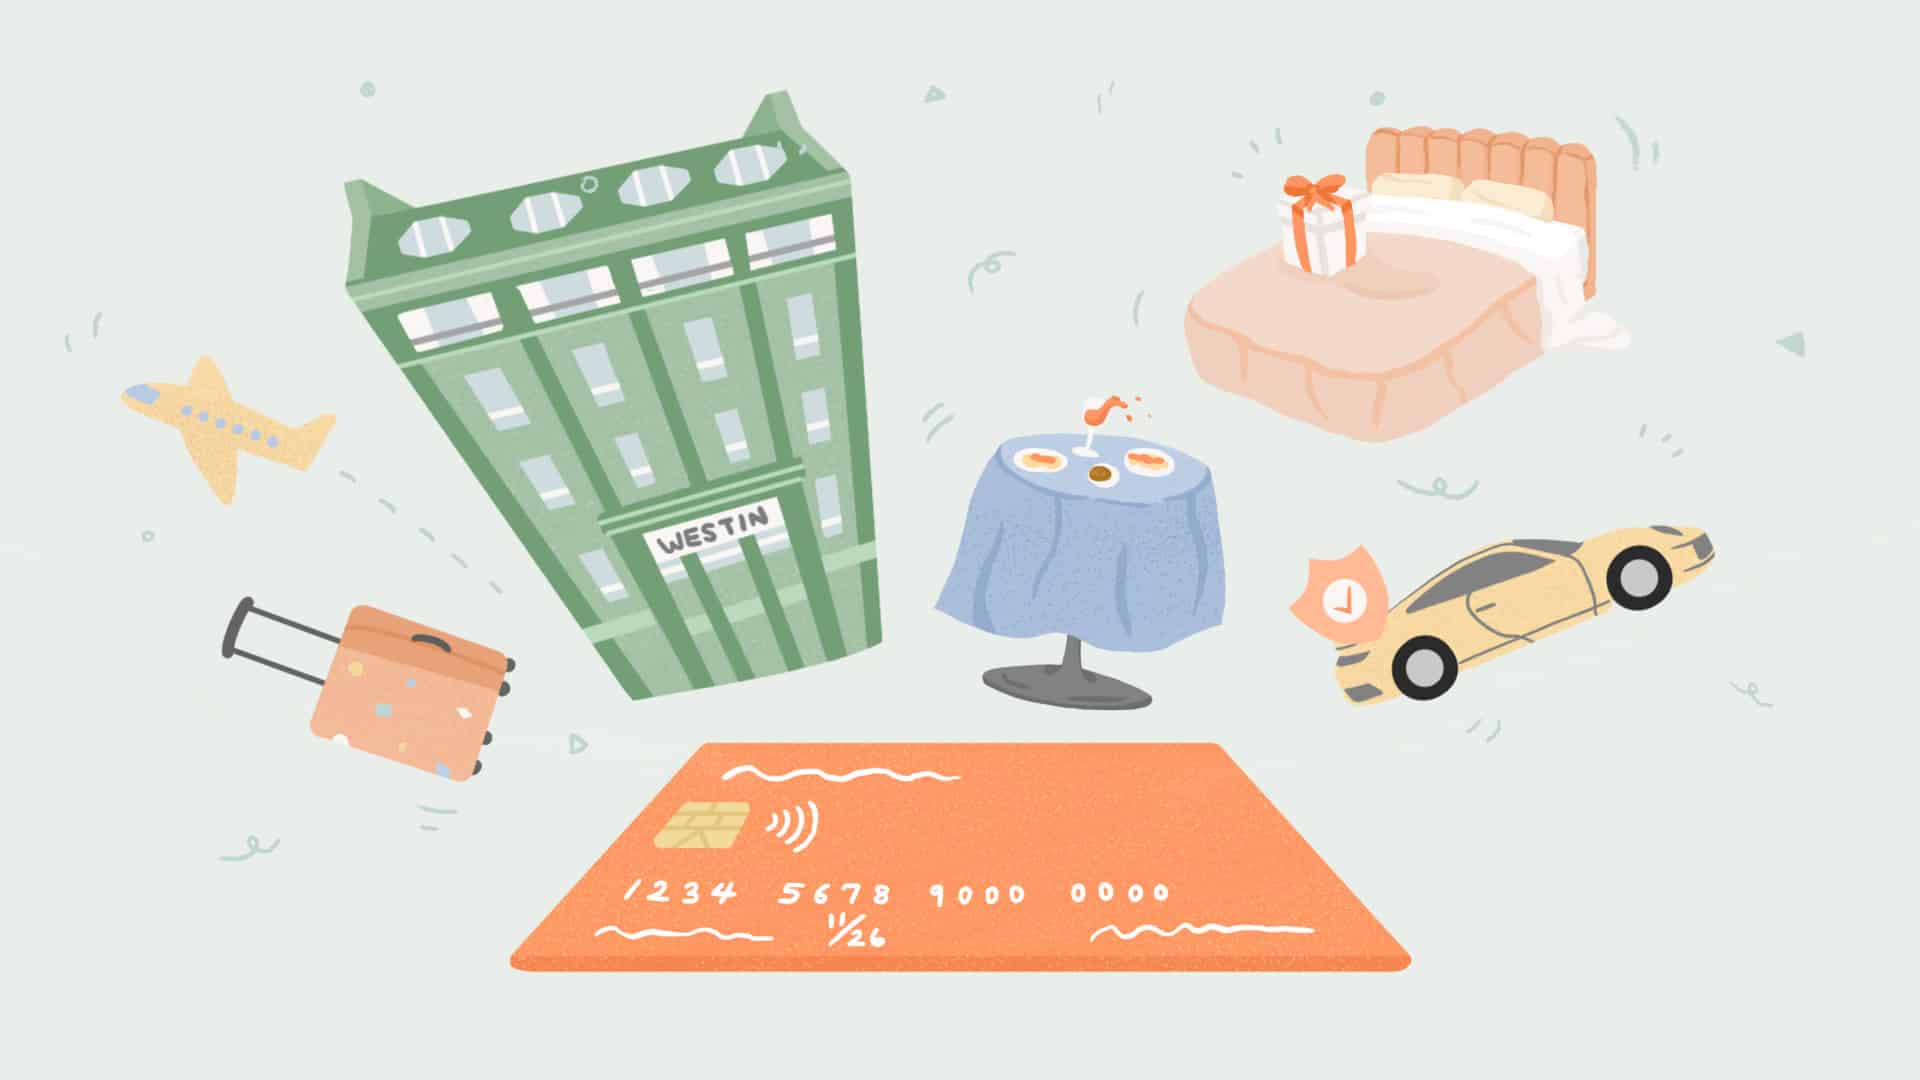 an illustration of credit card and items to spend money on